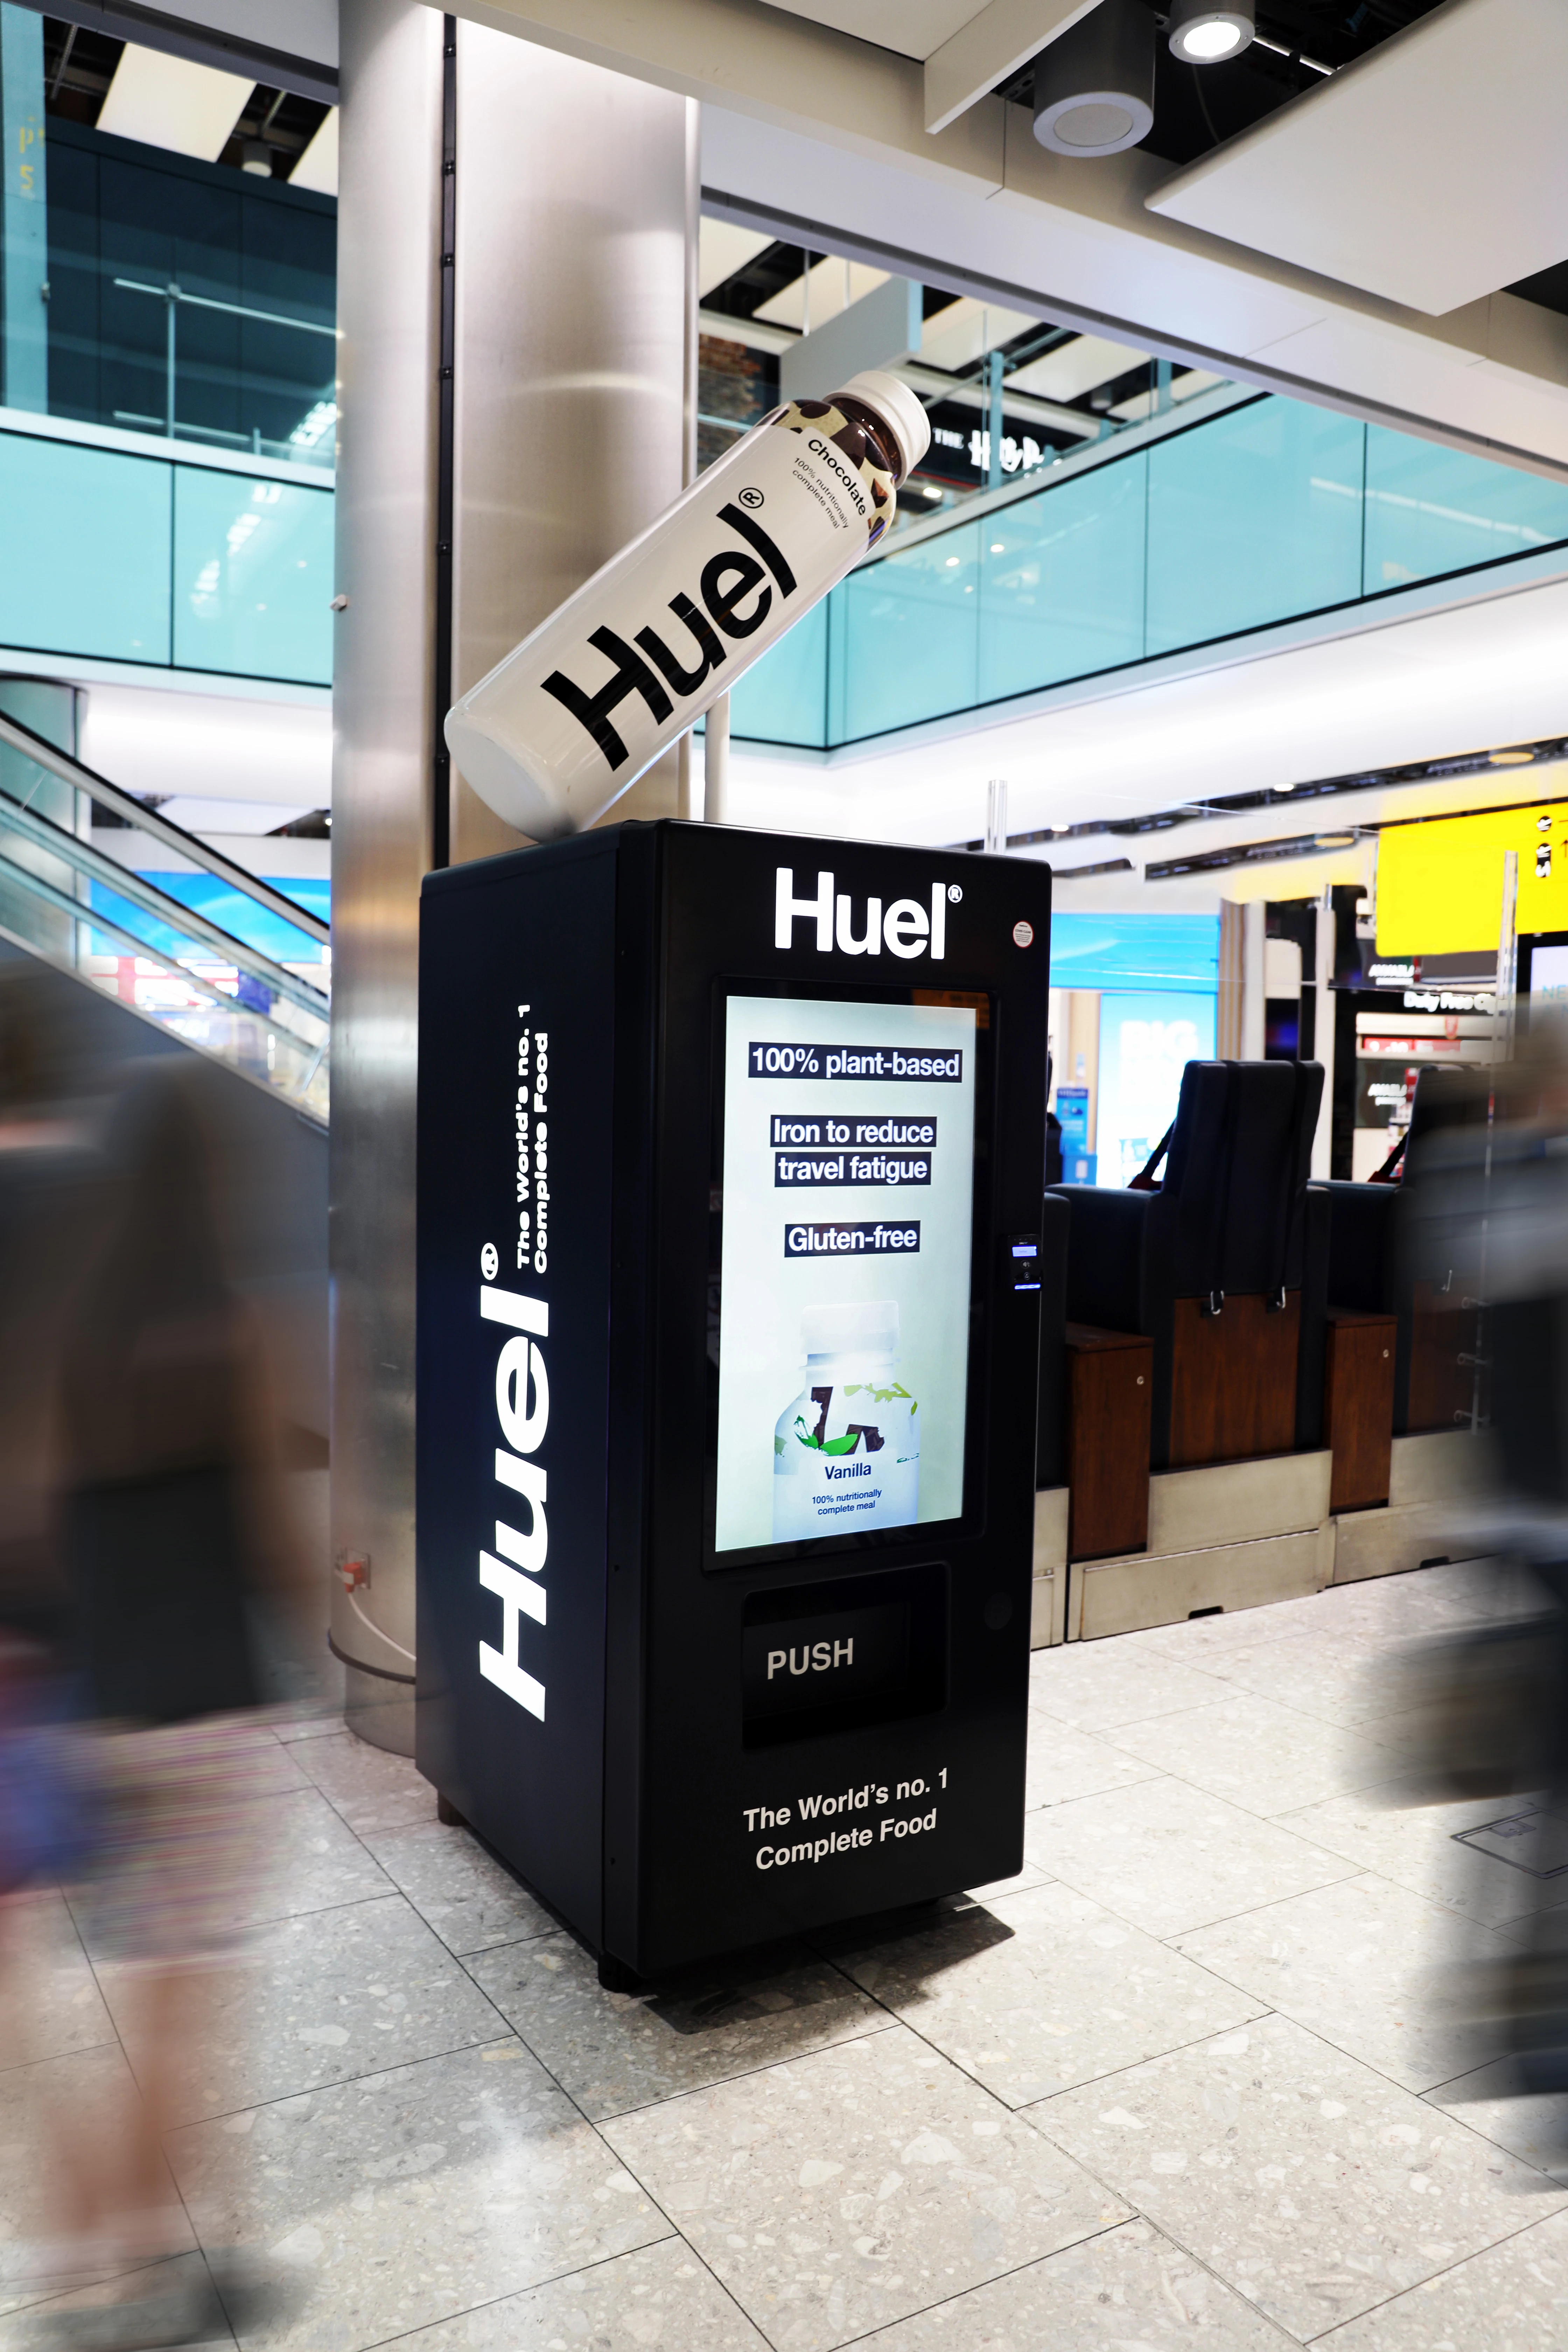 Huel land vending machines in Heathrow and expand into Tesco stores